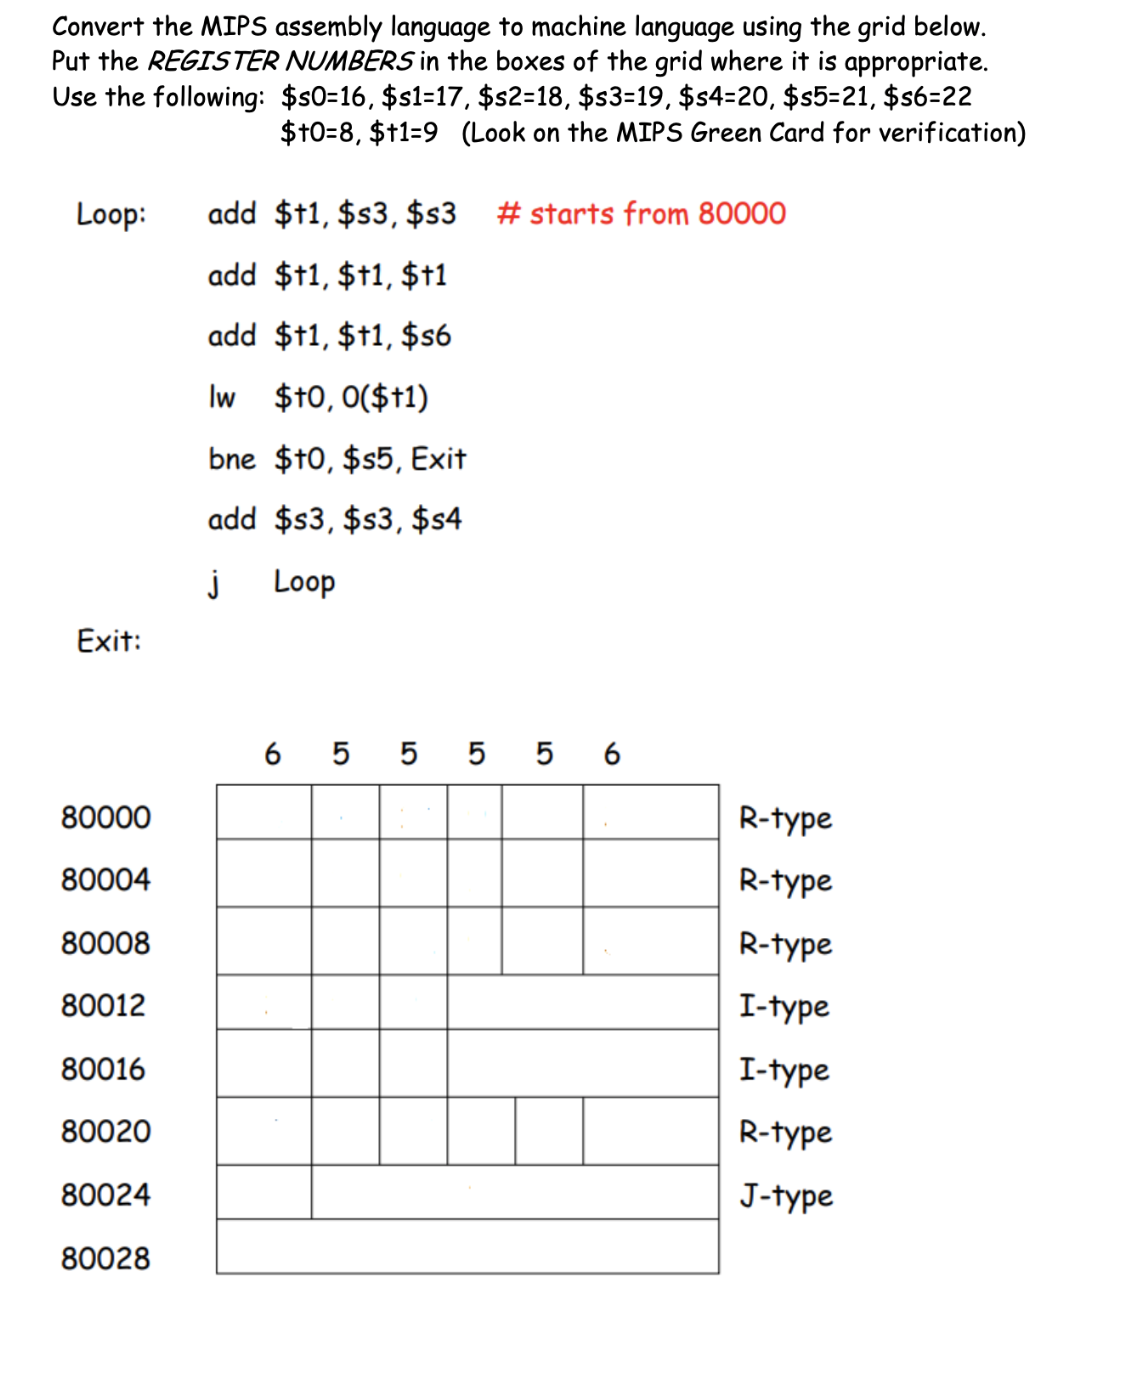 Convert the MIPS assembly language to machine language using the grid below.
Put the REGISTER NUMBERS in the boxes of the grid where it is appropriate.
Use the following: $s0=16, $s1=17, $s2=18, $s3=19, $s4=20, $s5=21, $s6=22
$10=8, $11=9 (Look on the MIPS Green Card for verification)
Loop:
add $11, $s3, $s3 # starts from 80000
add $1, $11, $t1
add $11, $11, $s6
Iw $t0, 0($1)
bne $10, $s5, Exit
add $s3, $s3, $$4
j
Loop
Exit:
6 5 5 5 5 6
80000
R-type
80004
R-type
80008
R-type
80012
I-type
80016
I-type
80020
R-type
80024
J-type
80028
